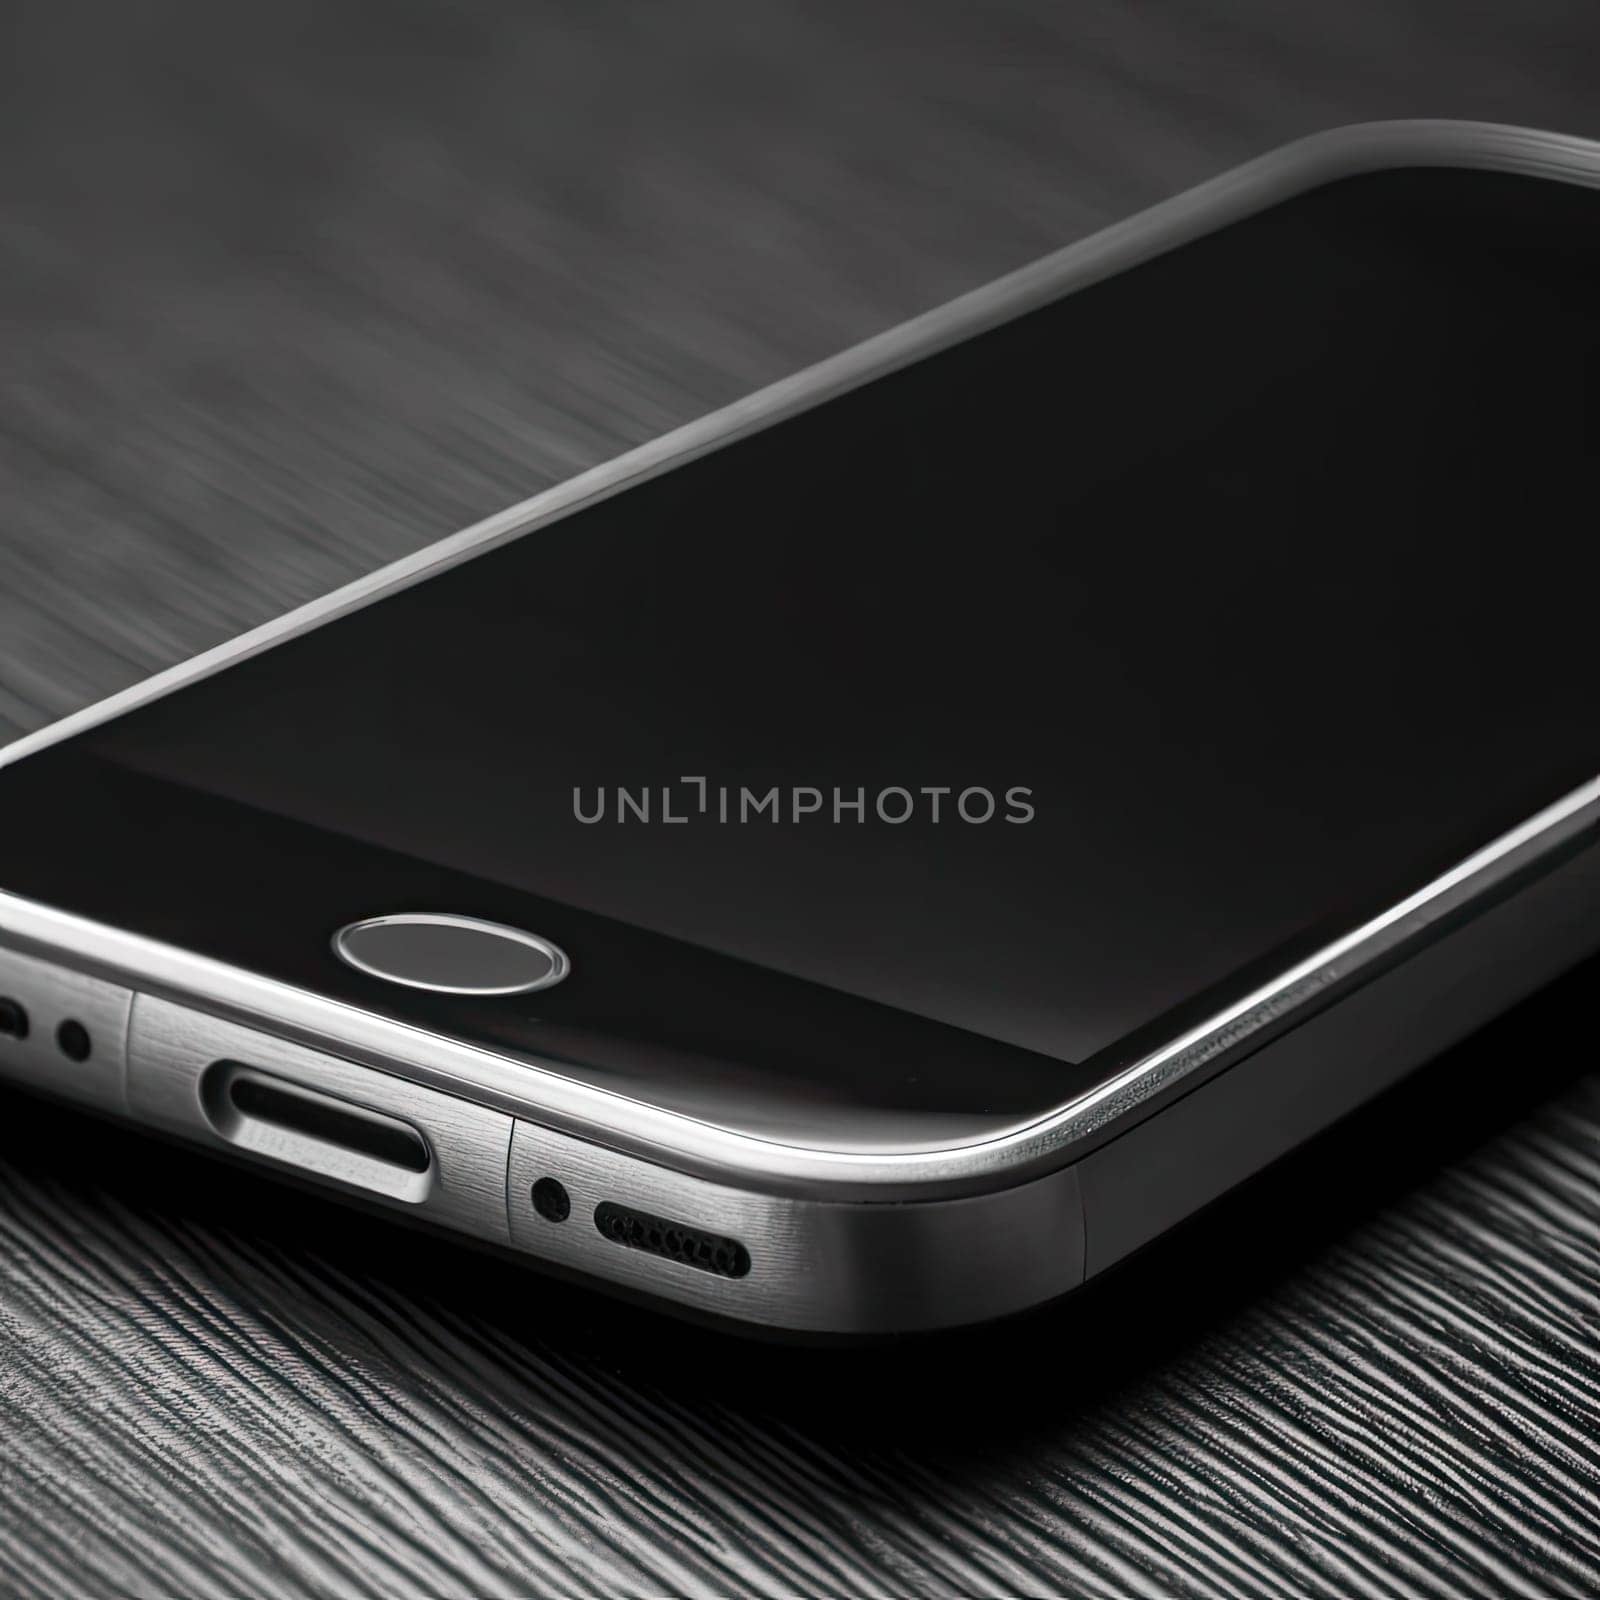 Mobile phone on a dark wooden background - close-up - selective focus (ID: 001326)